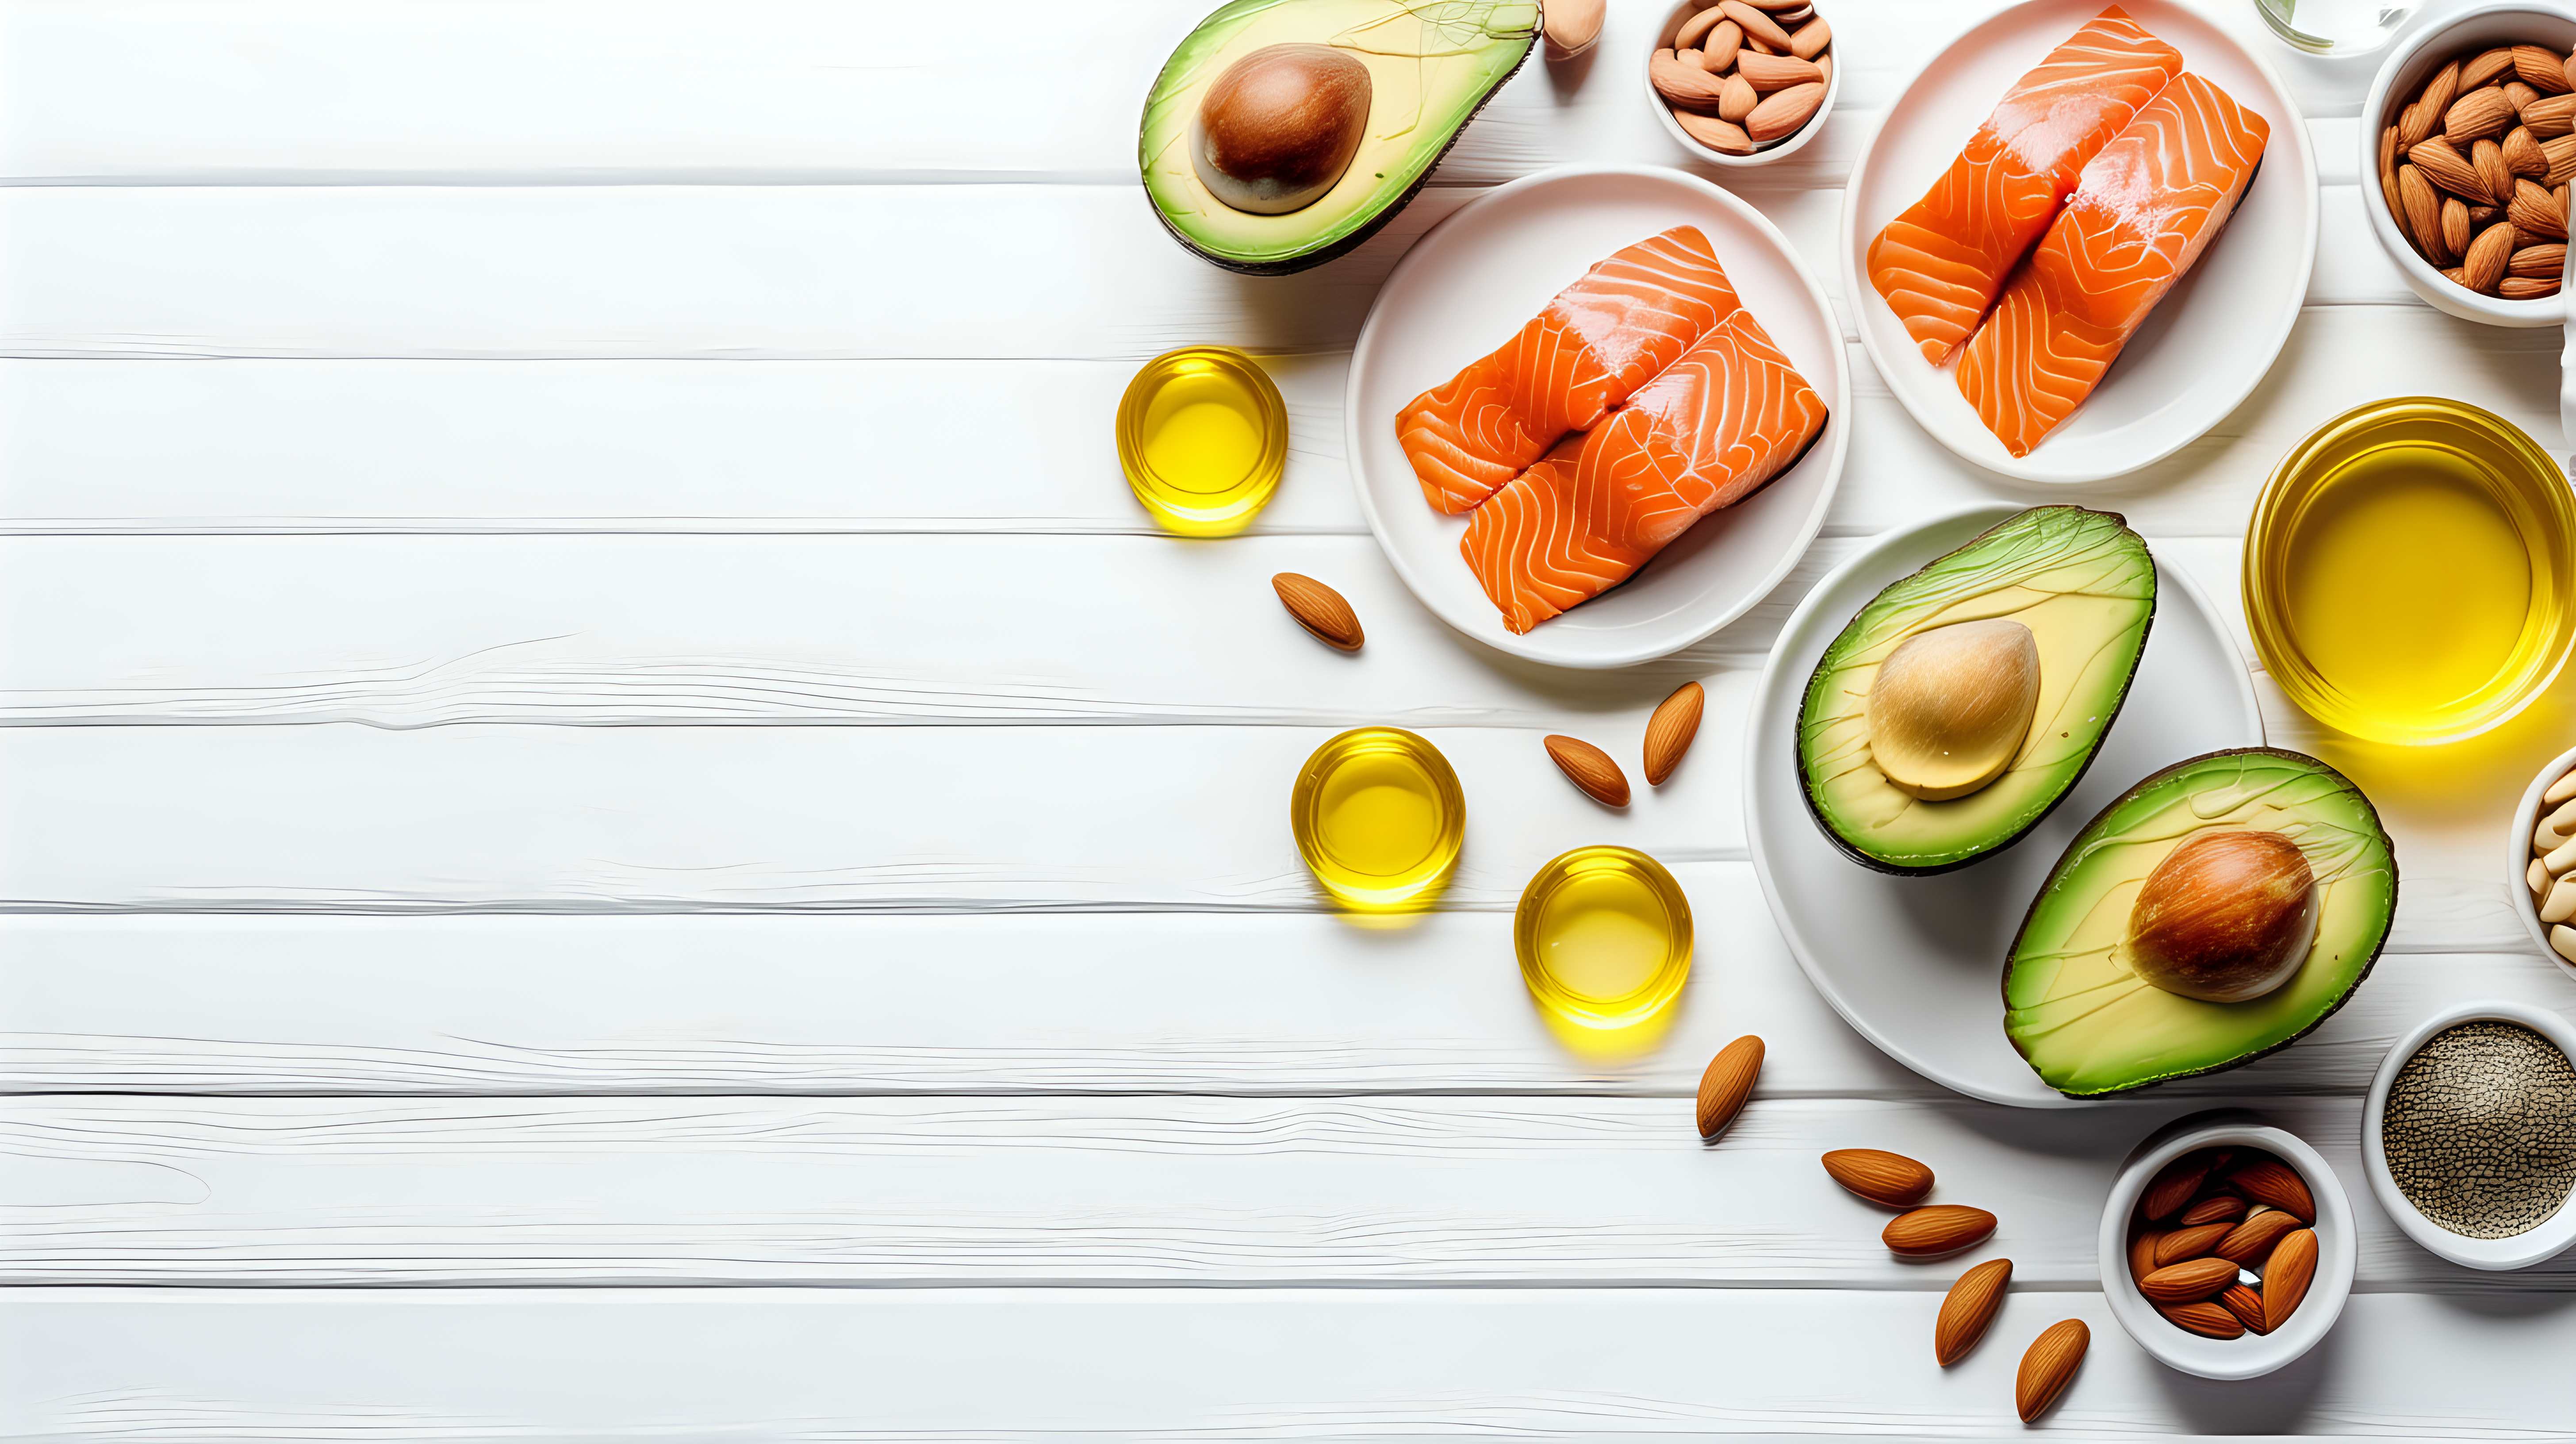 Food high in omega-3 fatty acids on a white wooden background. Healthy eating concept. Salmon, avocado, flax seeds, fish fat capsules, oil, almonds. Top view, copy space